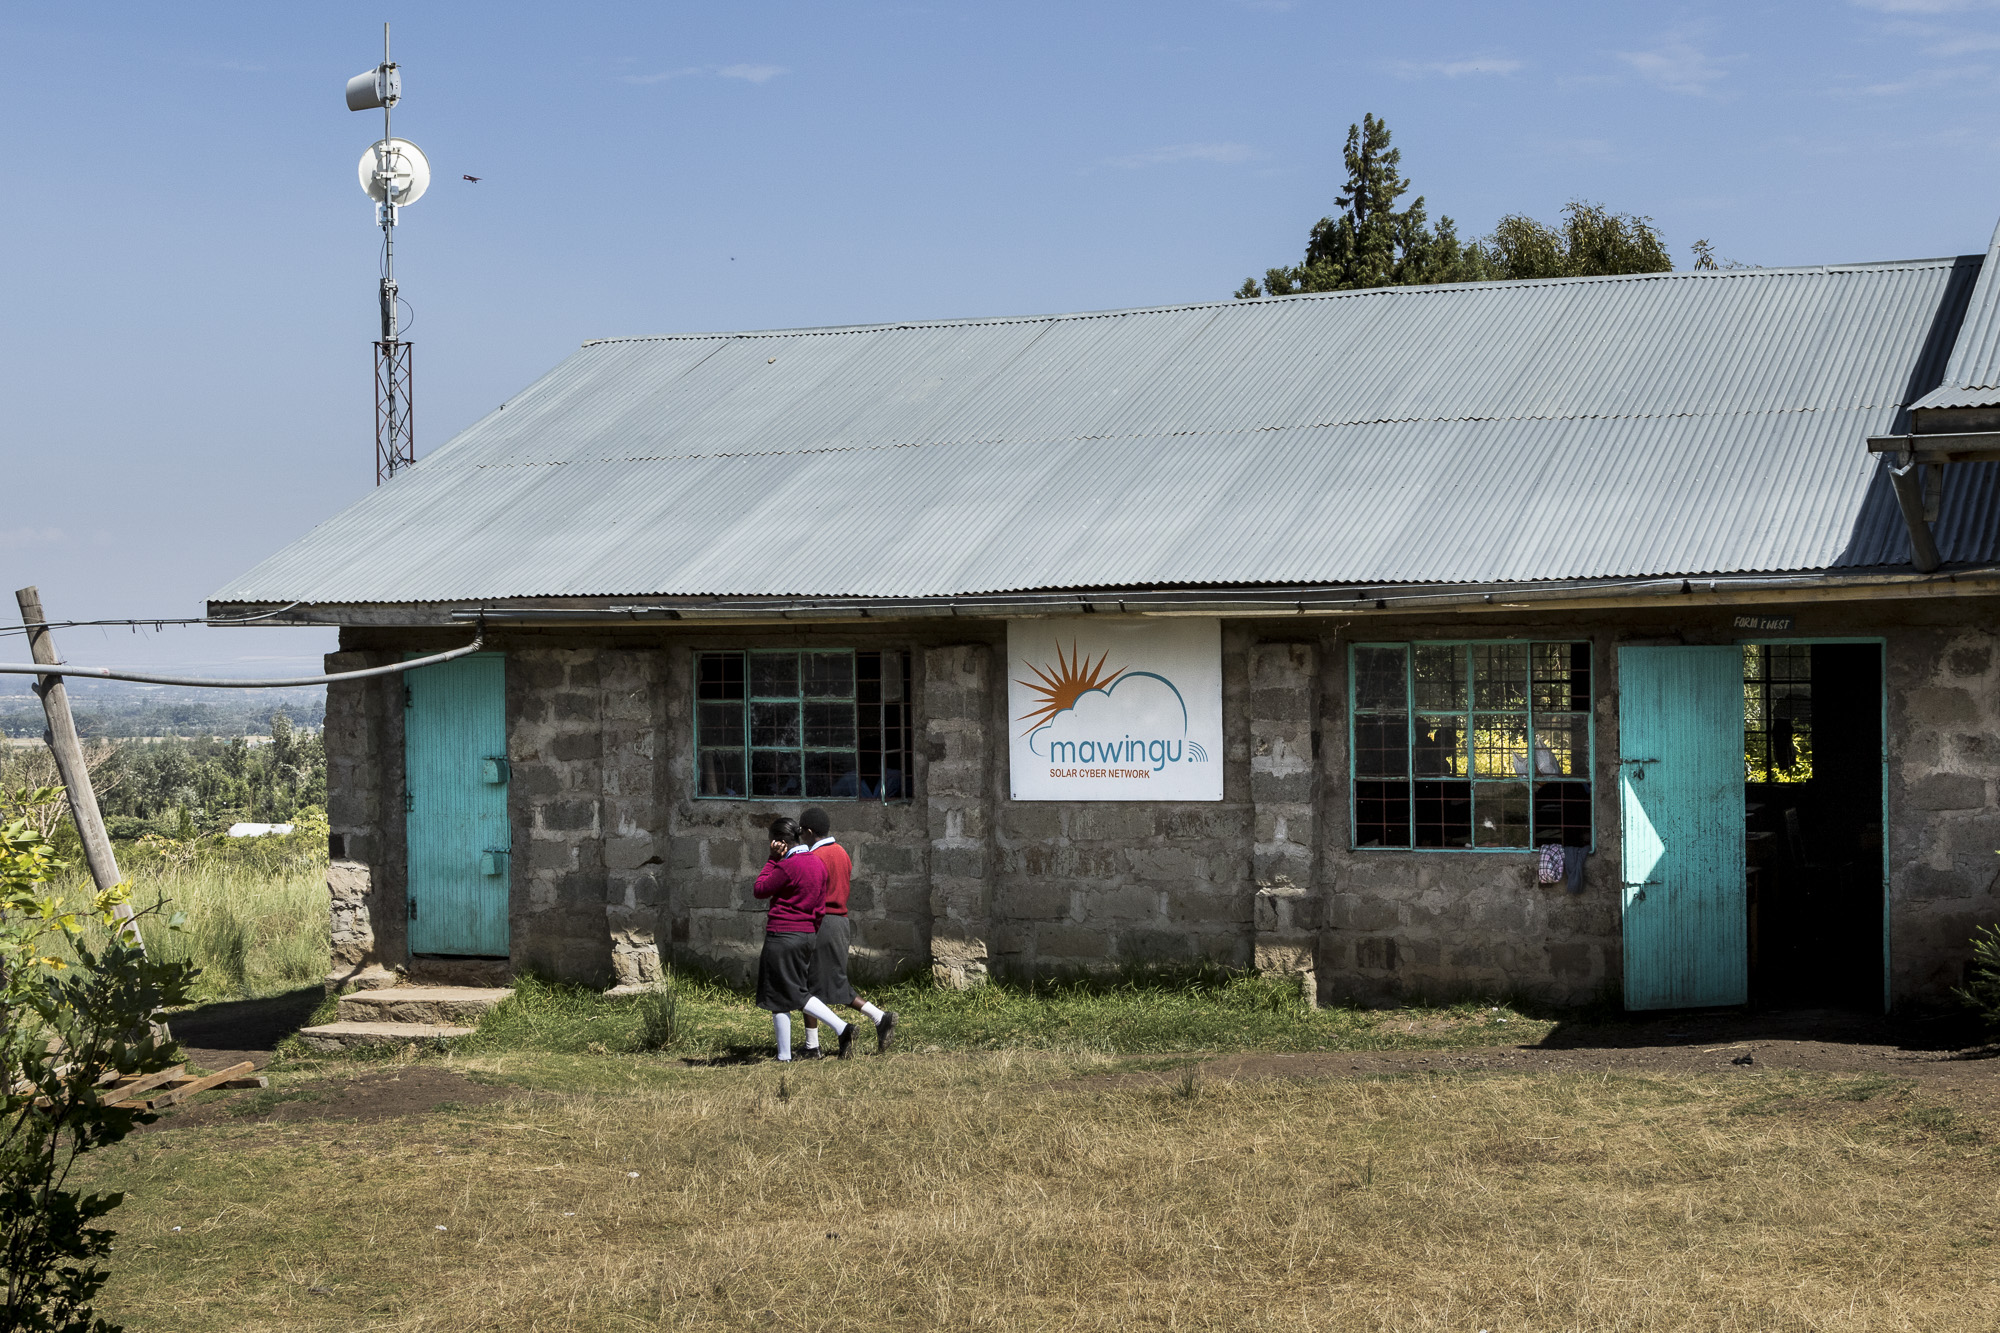 In Nanyuki, Kenya, Microsoft partners with Mawingu Networks to repurpose TV white spaces and bring entire communities online for the first time with reliable, affordable Internet access. 